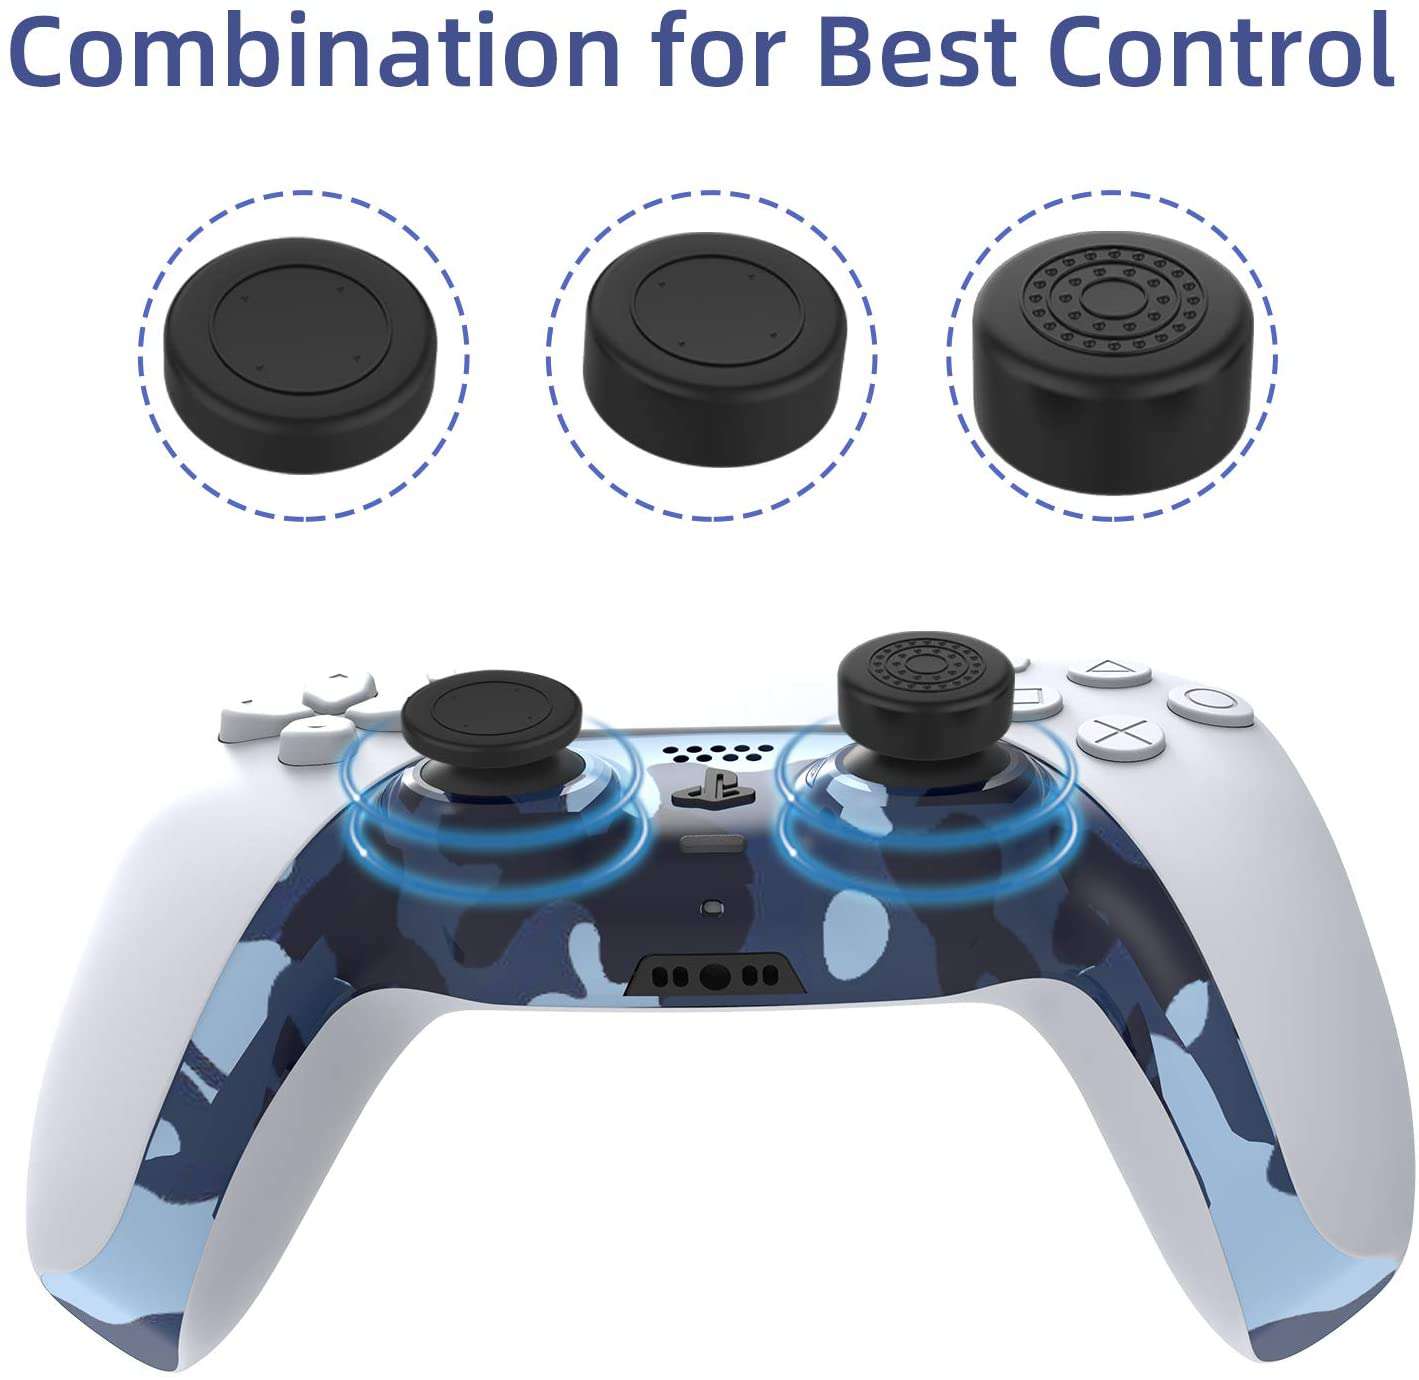 The three pairs of joystick caps can be interchanged with the PS5 controller.